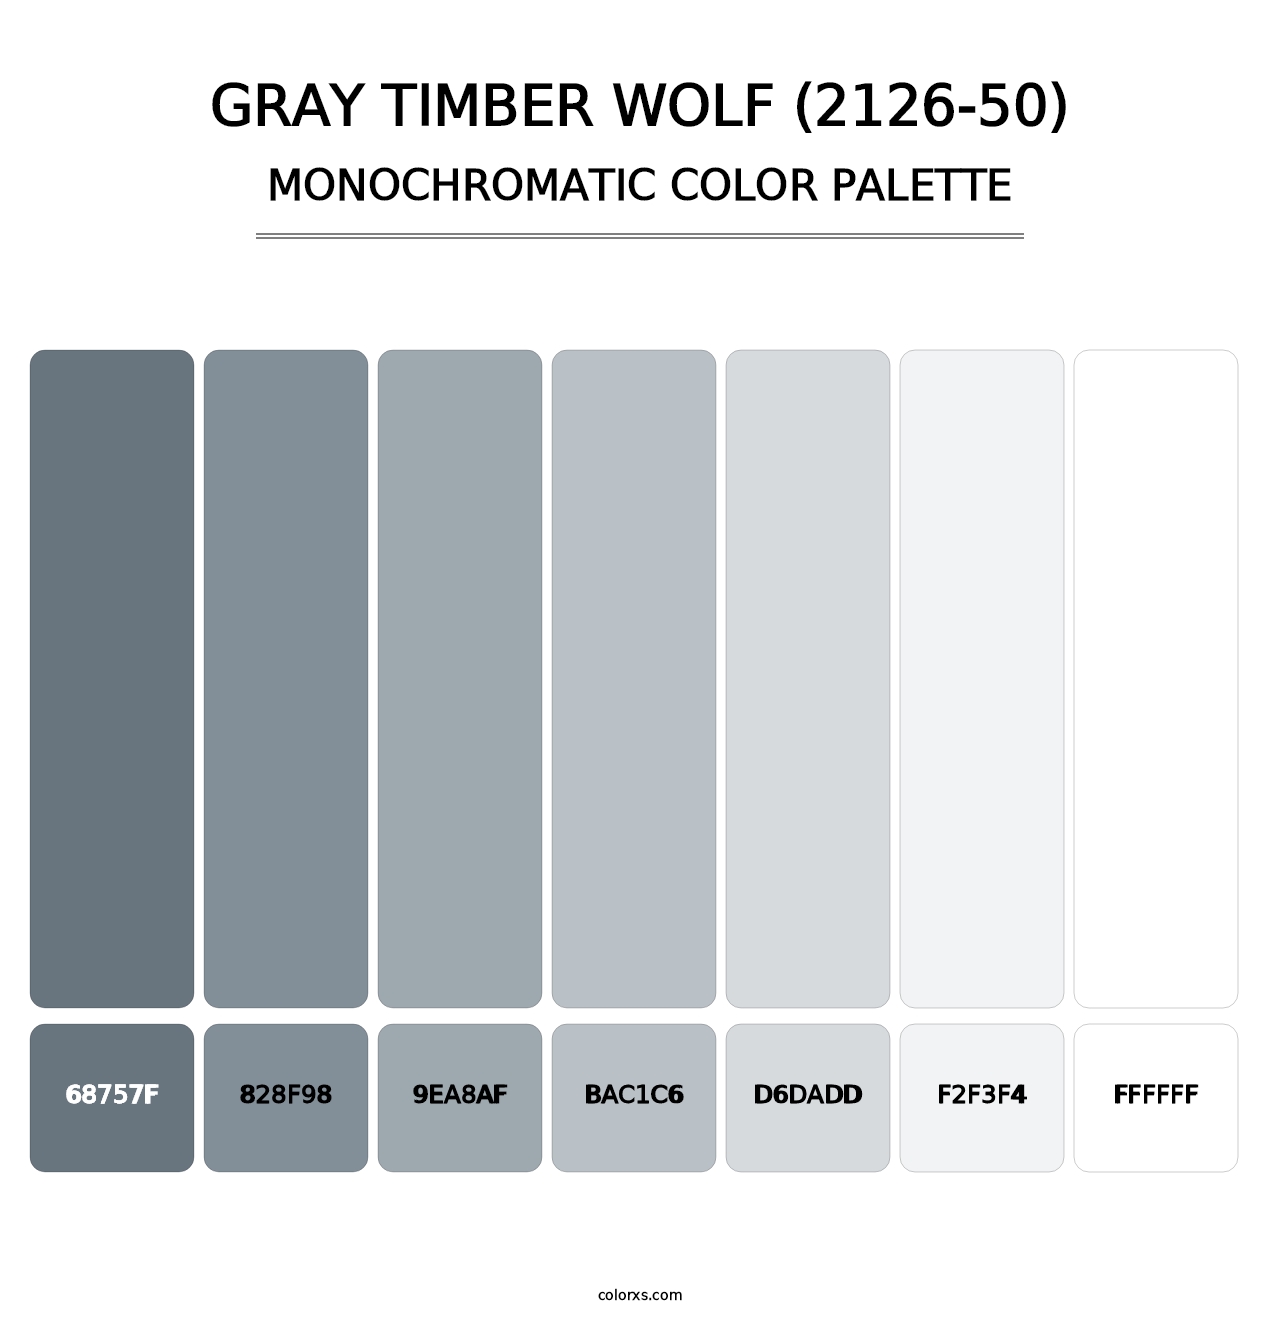 Gray Timber Wolf (2126-50) - Monochromatic Color Palette